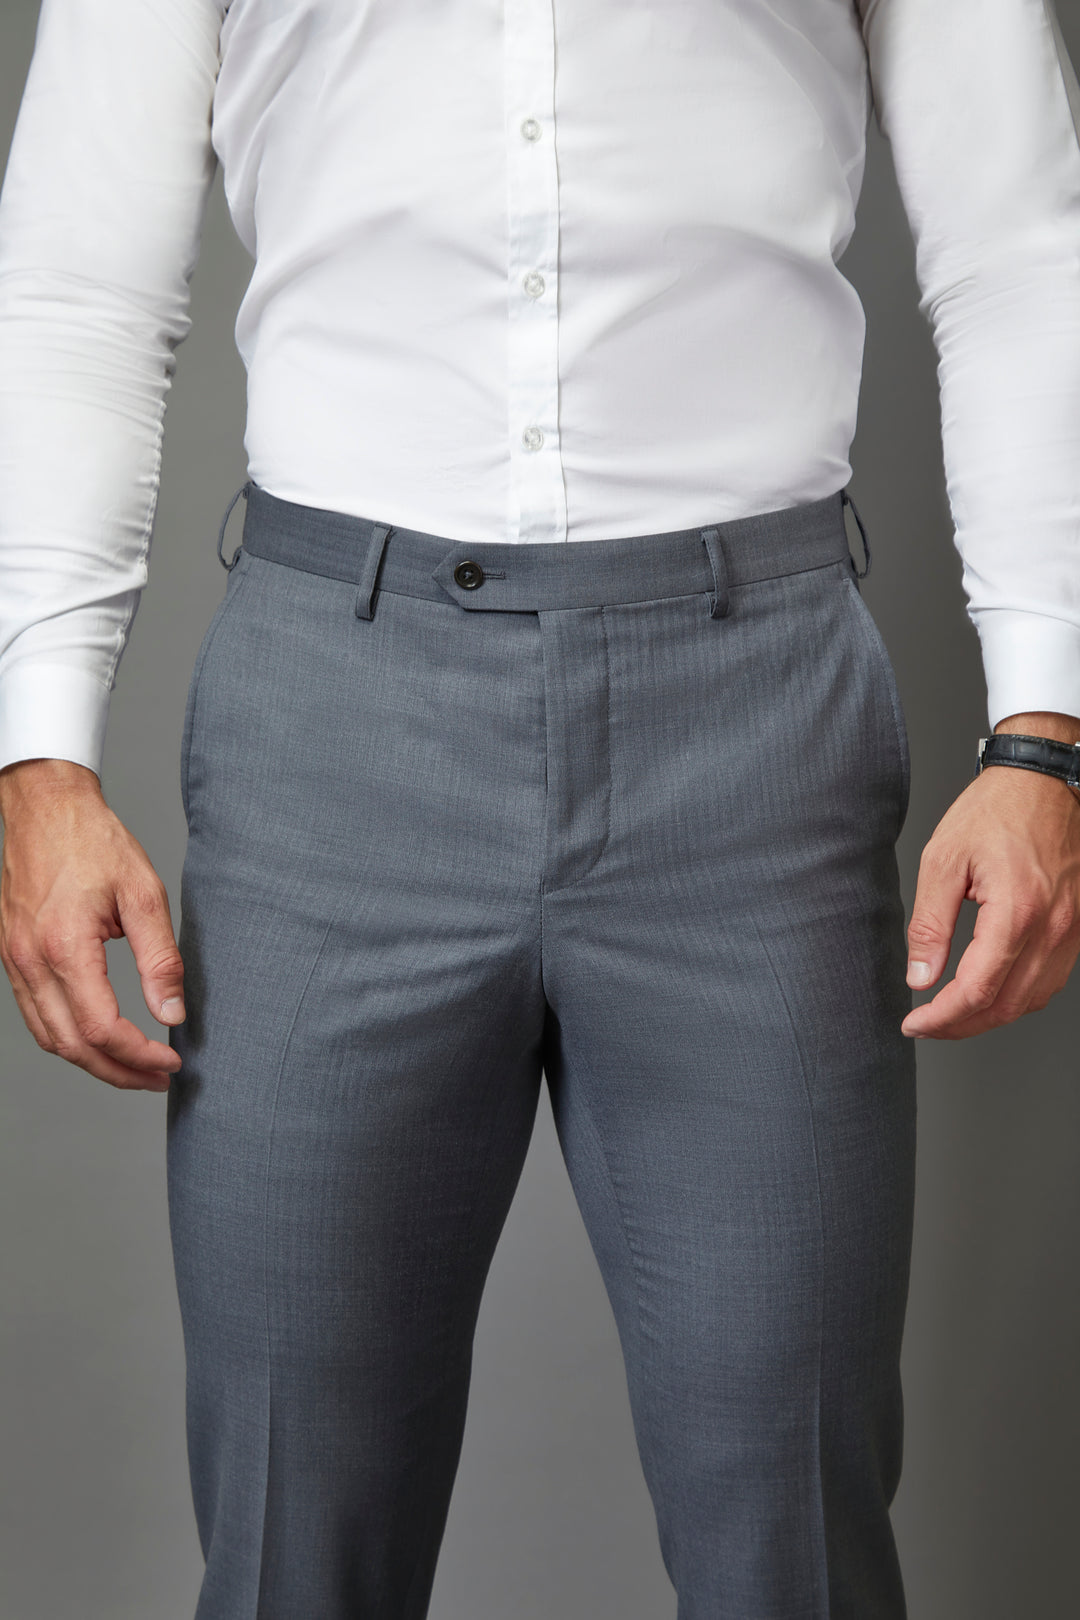 The Bespoke Suit by Tapered Menswear, designed specifically for muscular figures, ensures a flawless fit, made from premium Australian wool, available in a variety of colors and designs, perfect for those with athletic bodies